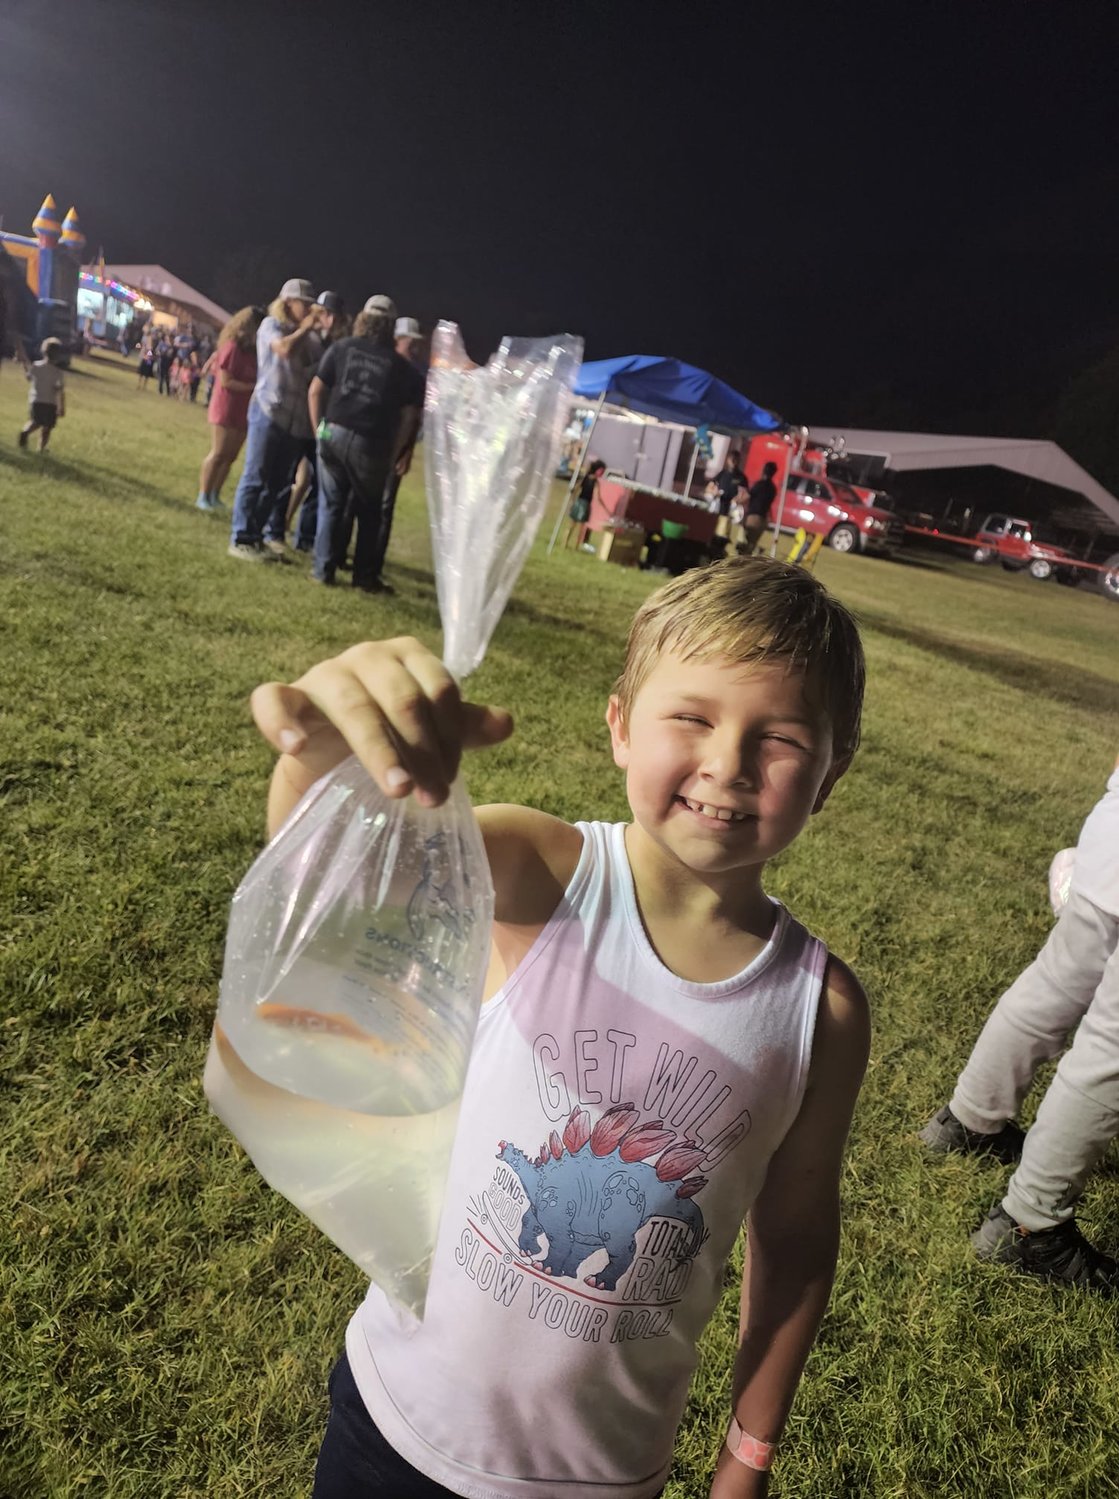 Not all summer fun can be found outside Webster County; Kami Clark and her lil dude had a great time at the tractor pulls this summer, here you can see him showing off the gold fish he won.